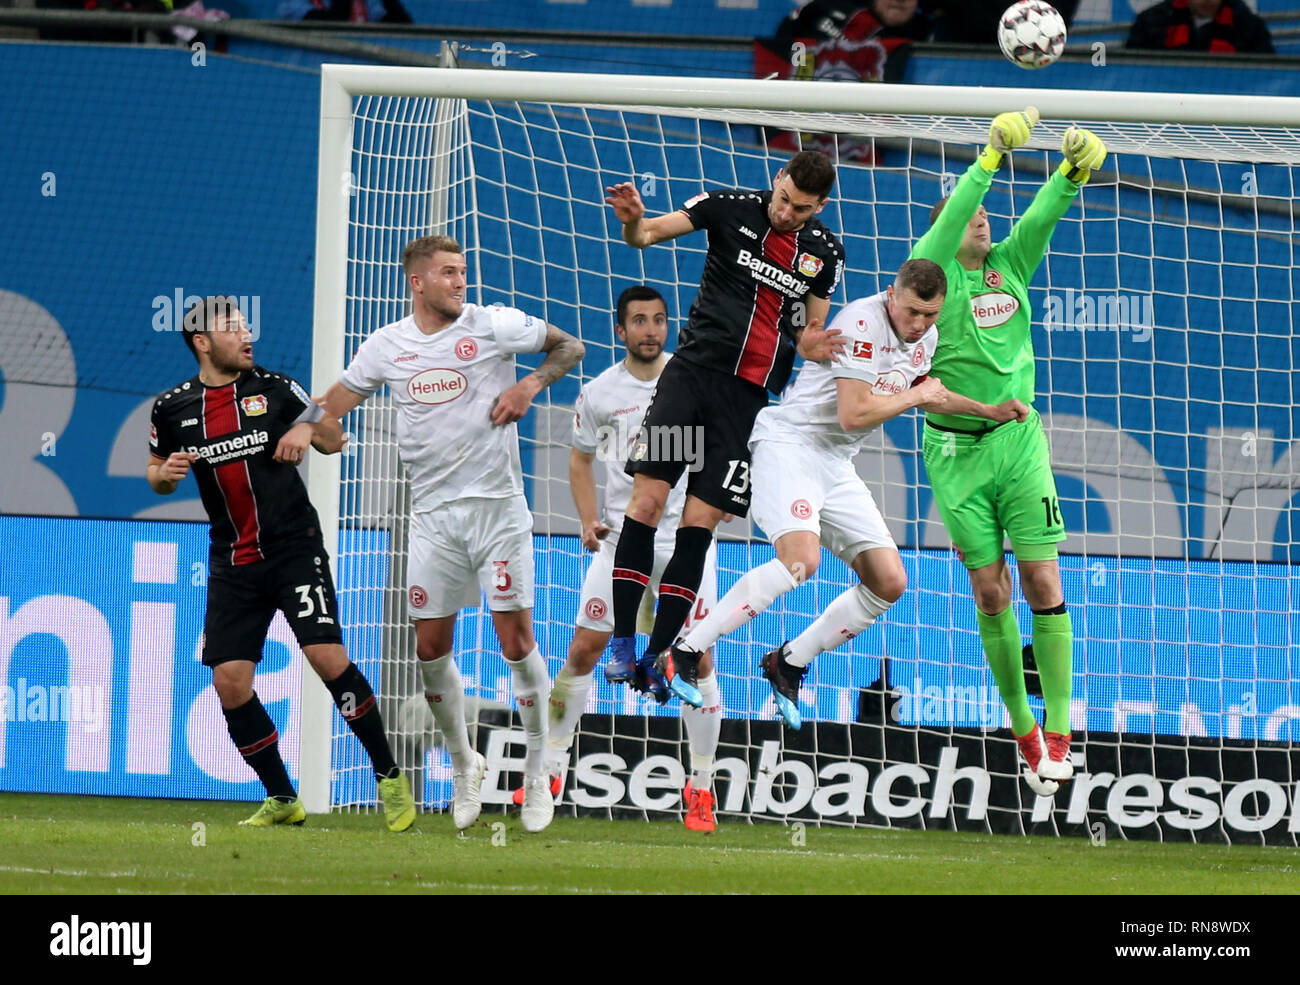 From right goalkeeper Jaroslav Drobny of Duesseldorf, Kaan Ayhan of Duesseldorfand, Lucas Alario of Leverkusen, Andre Hoffmann of Dusseldorf  and Kevin Volland of Leverkusen are seen in action during the Bundesliga soccer match between Bayer Leverkusen Vs Fortuna Dusseldorf at the BayArena, Leverkusen. ( Final score; Bayer Leverkusen 2:0 Fortuna Dusseldorf ) Stock Photo